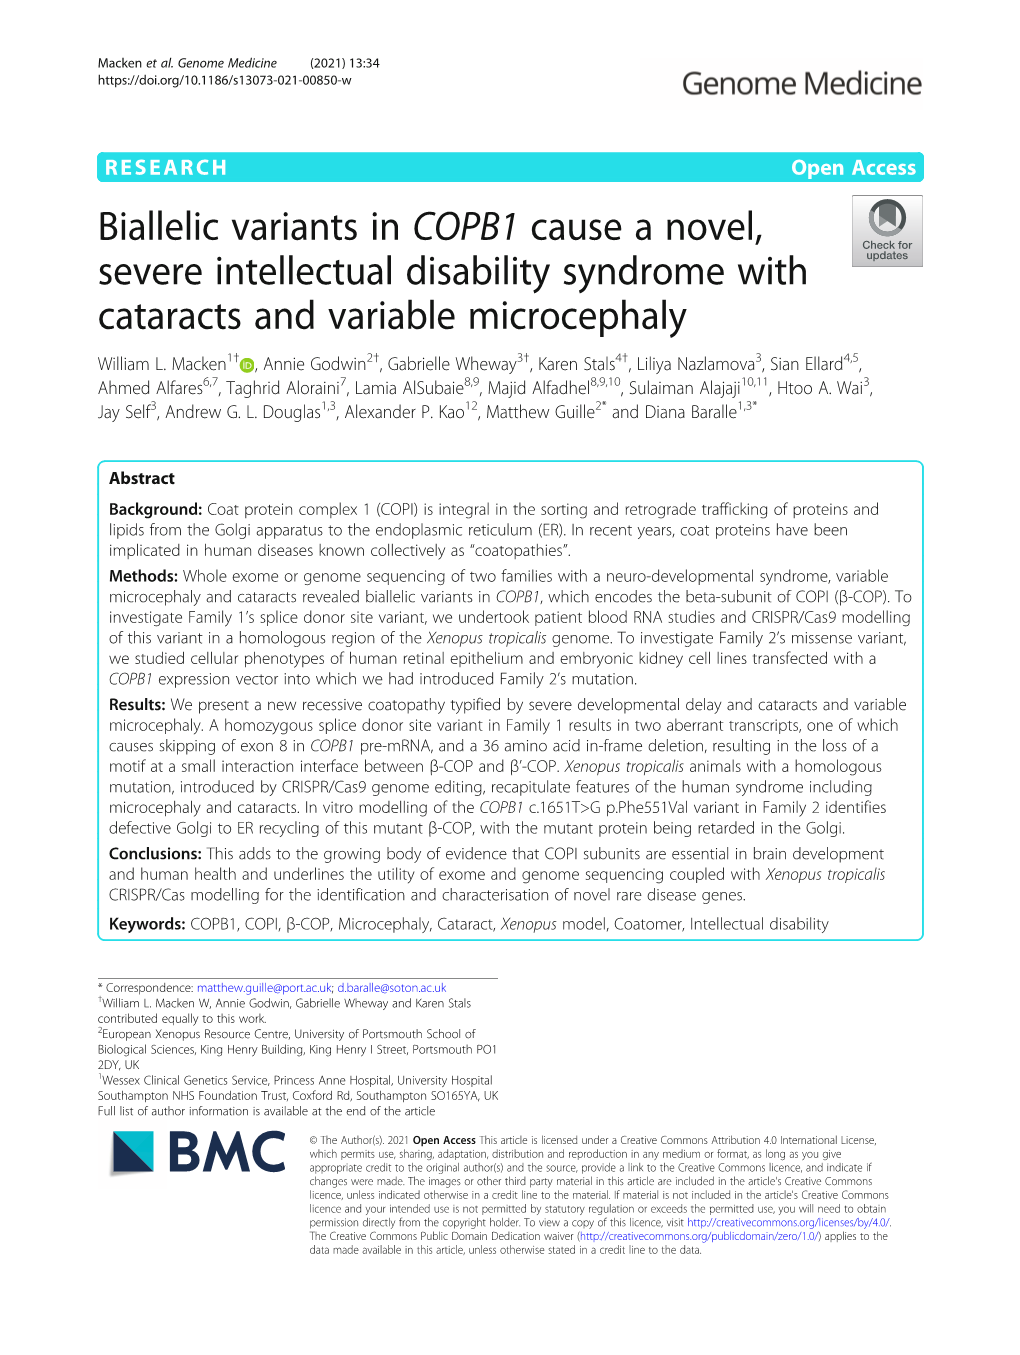 Biallelic Variants in COPB1 Cause a Novel, Severe Intellectual Disability Syndrome with Cataracts and Variable Microcephaly William L